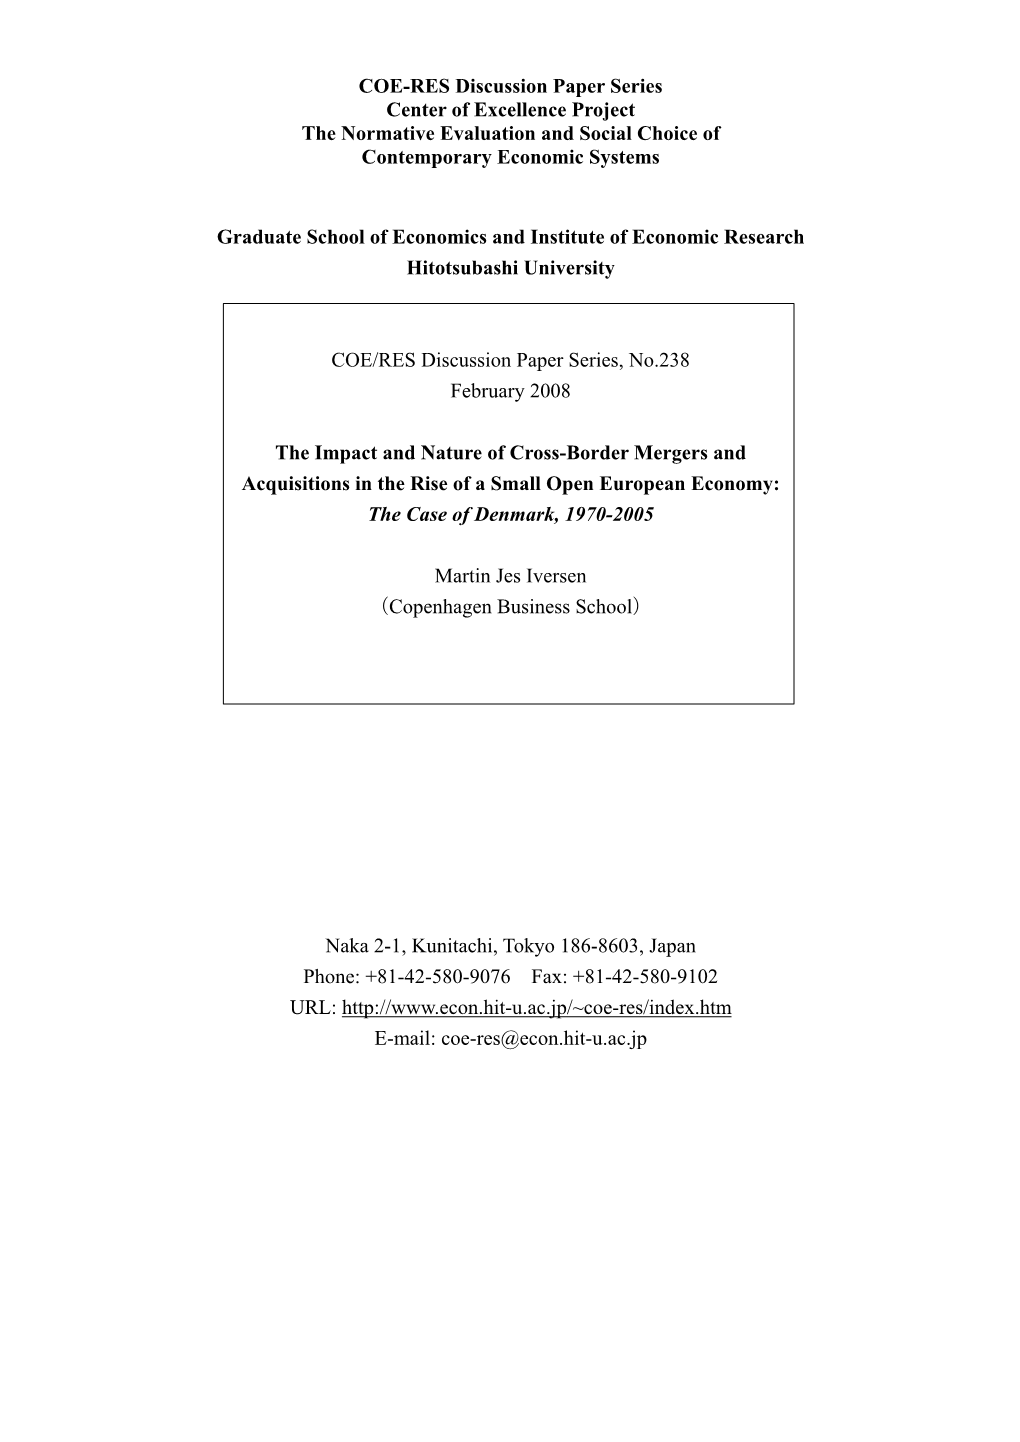 COE-RES Discussion Paper Series Center of Excellence Project the Normative Evaluation and Social Choice of Contemporary Economic Systems